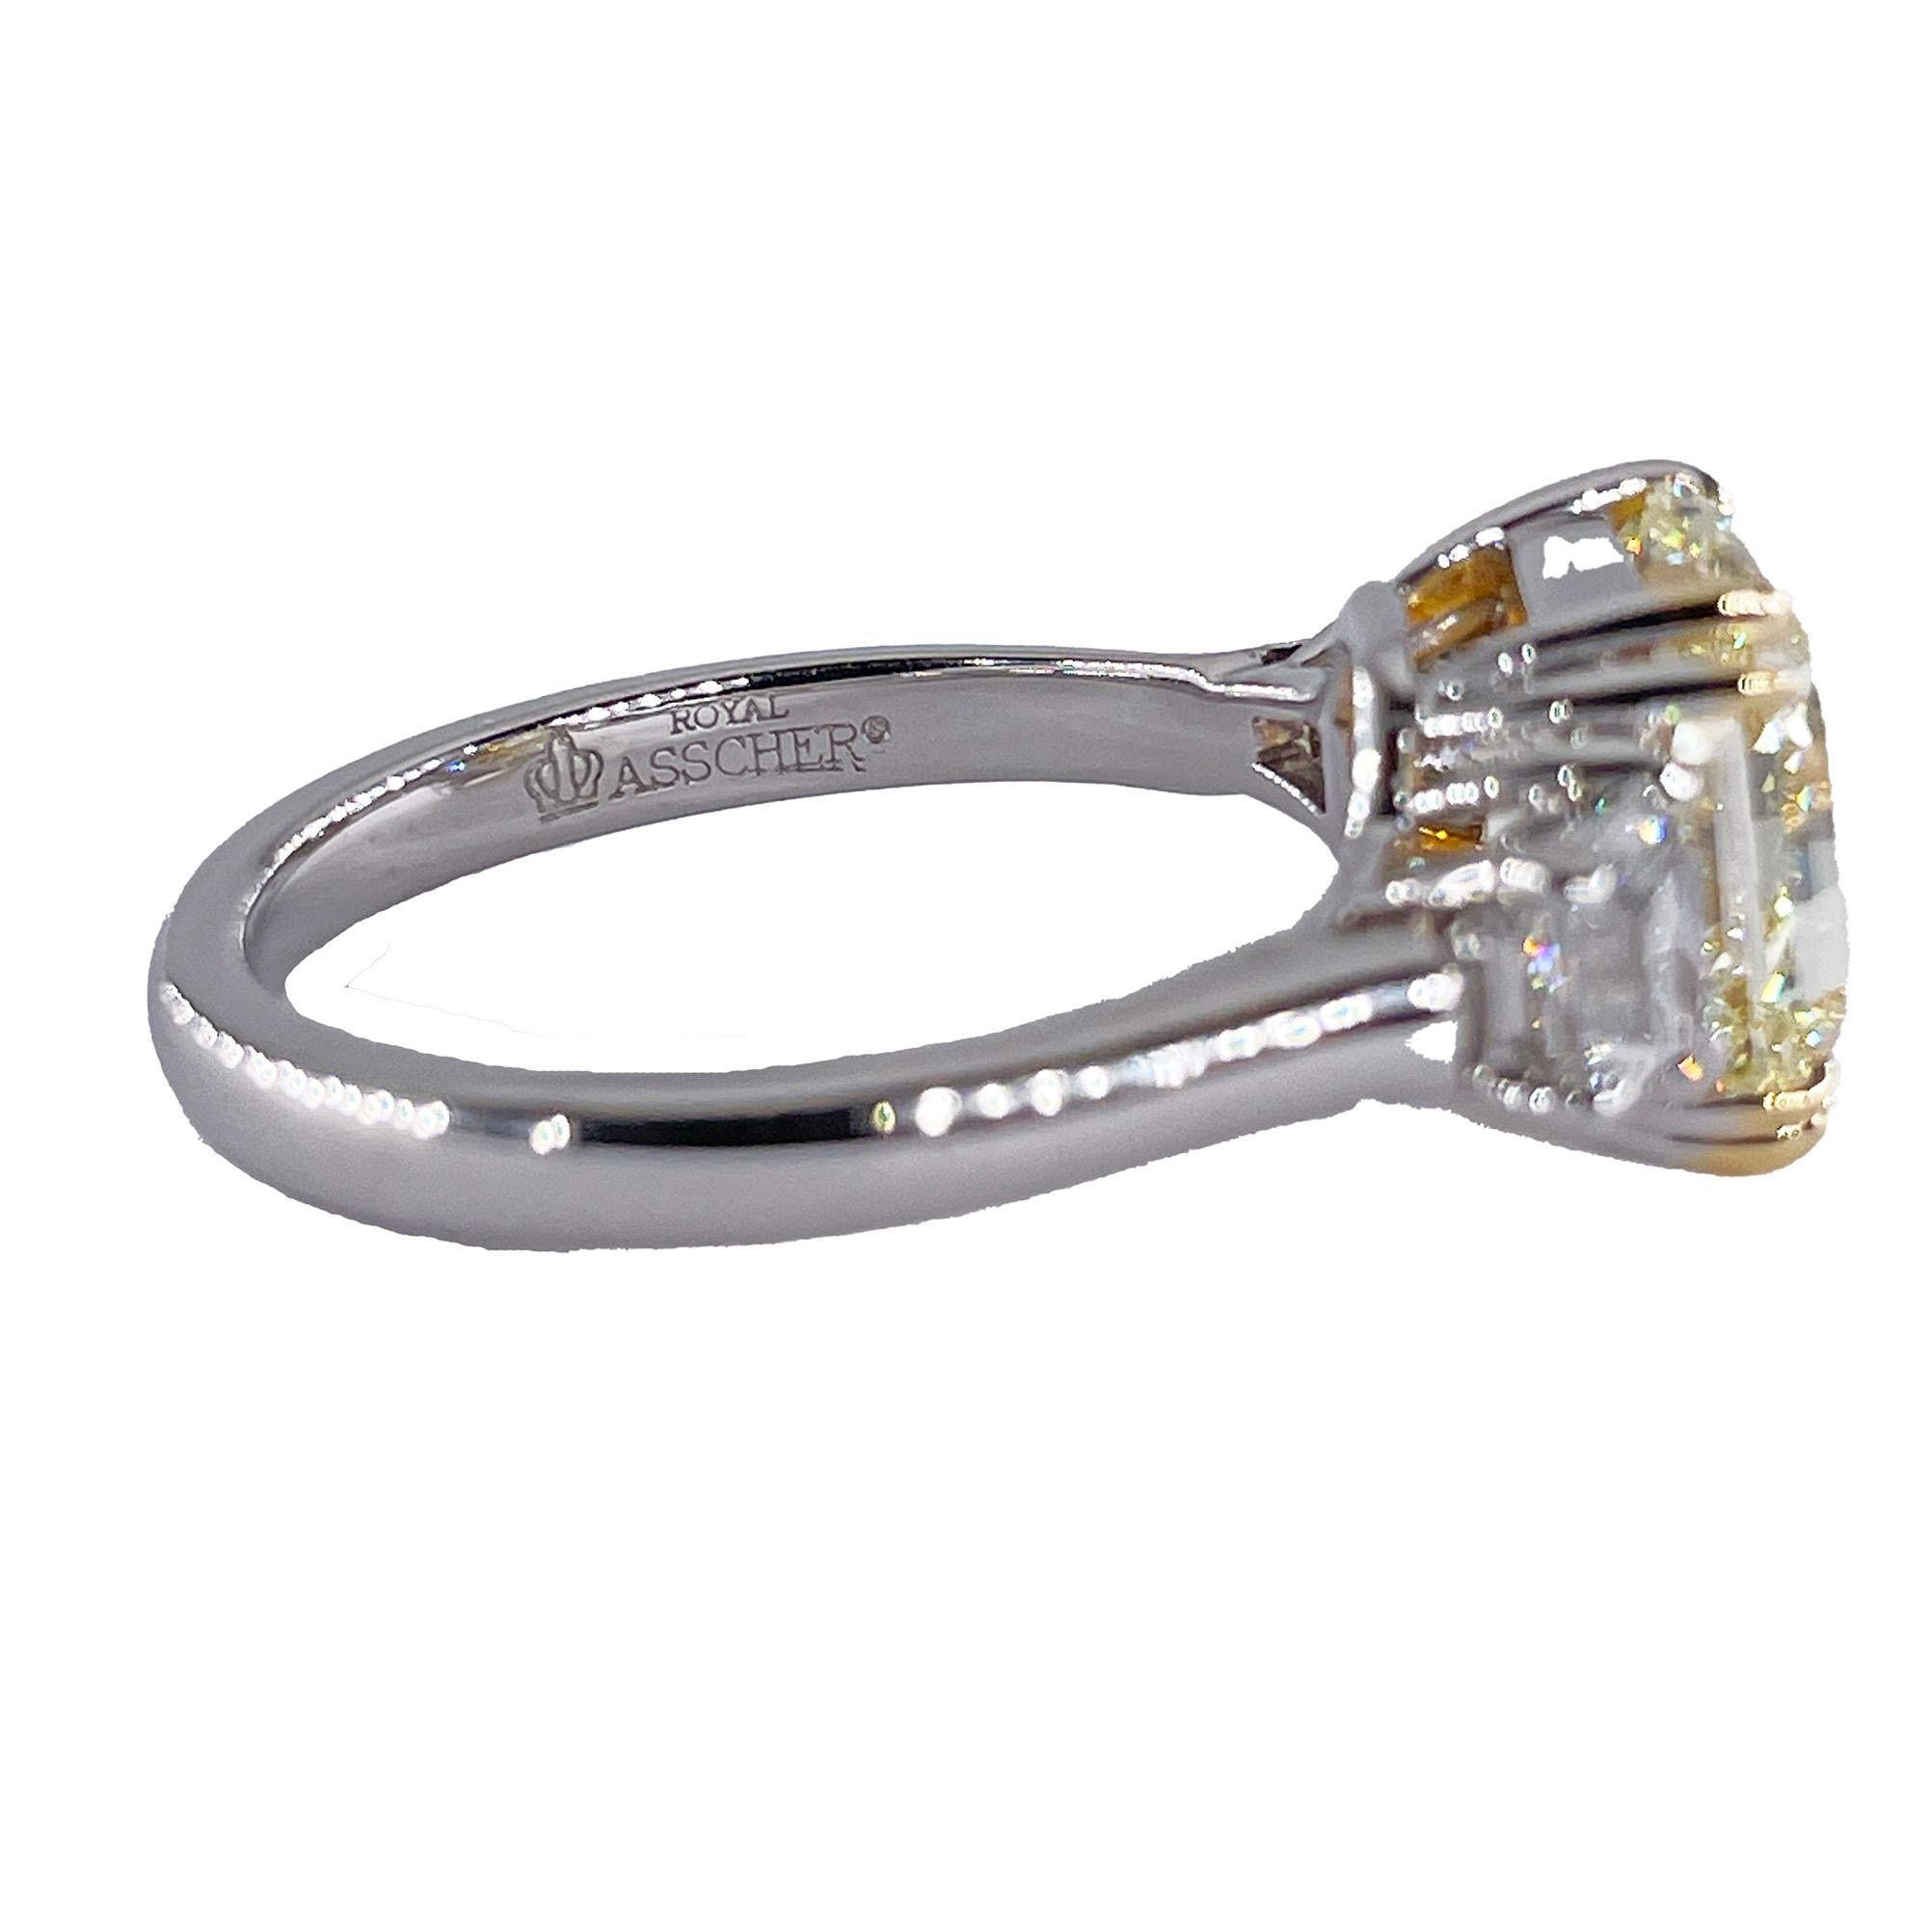 Vintage Royal Asscher GIA 4.32ctw Natural Fancy YELLOW Radiant Cut Diamond Ring For Sale 3